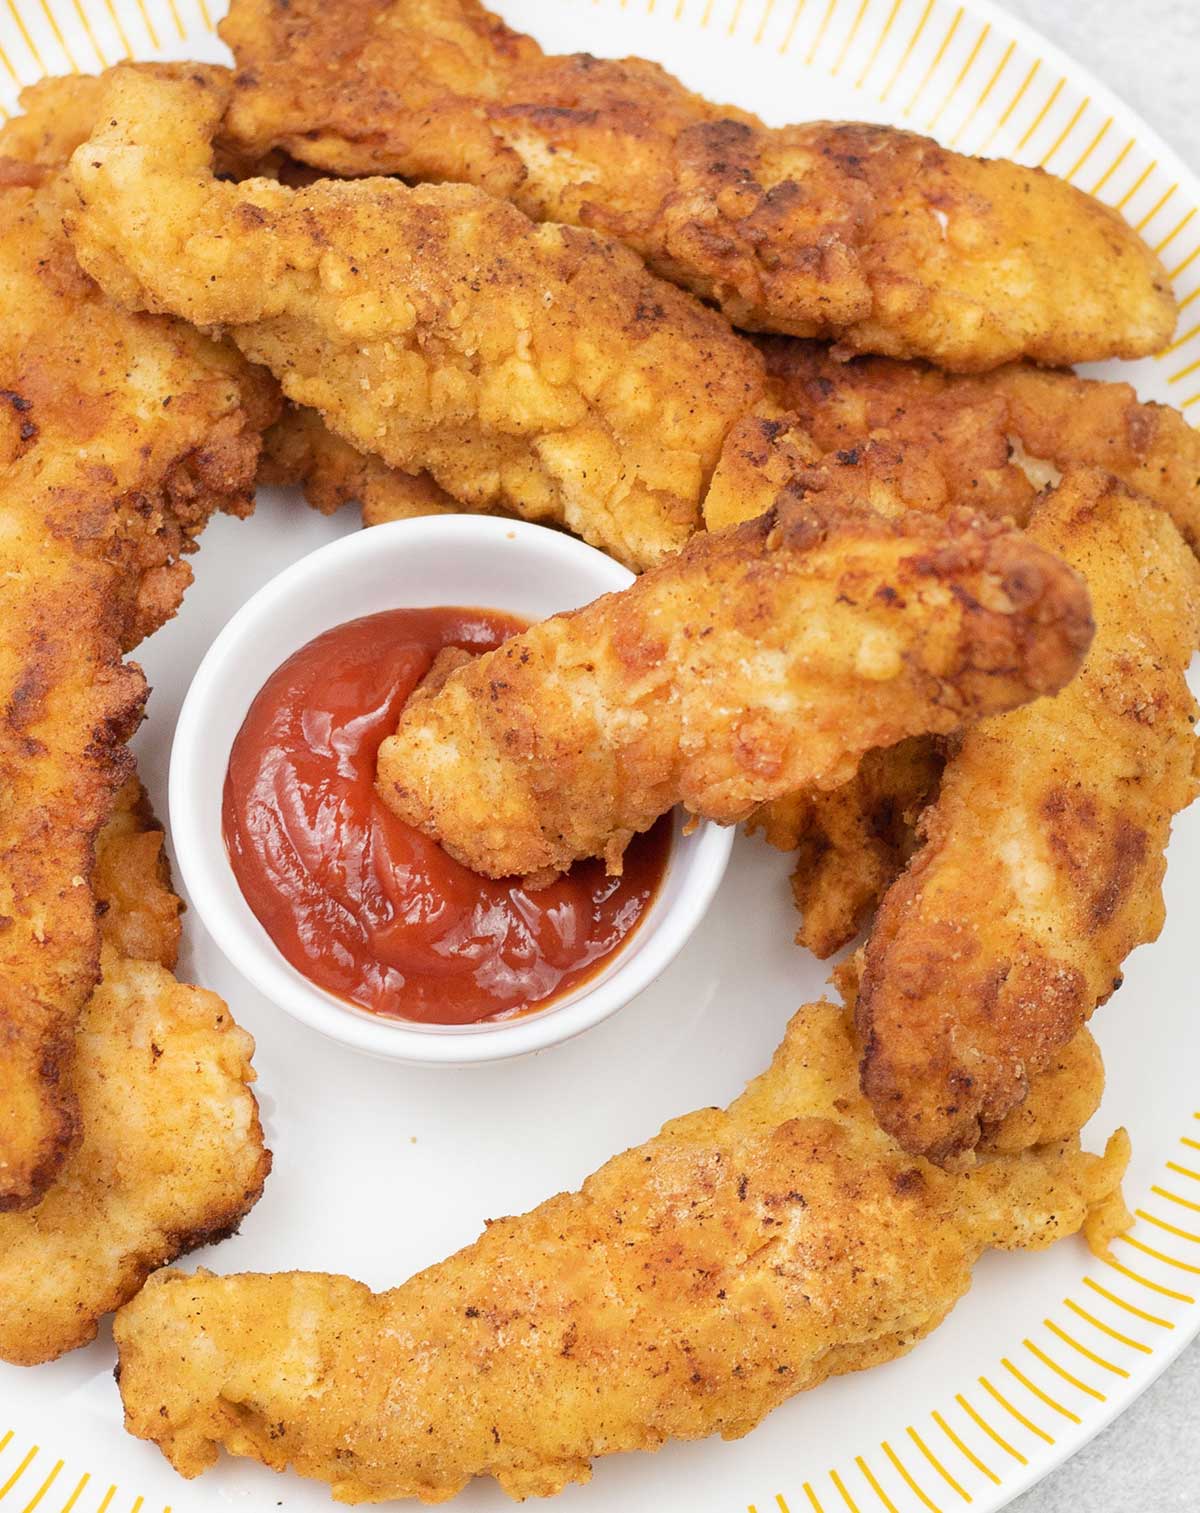 Fried chicken fingers dipped in a bowl of ketchup.